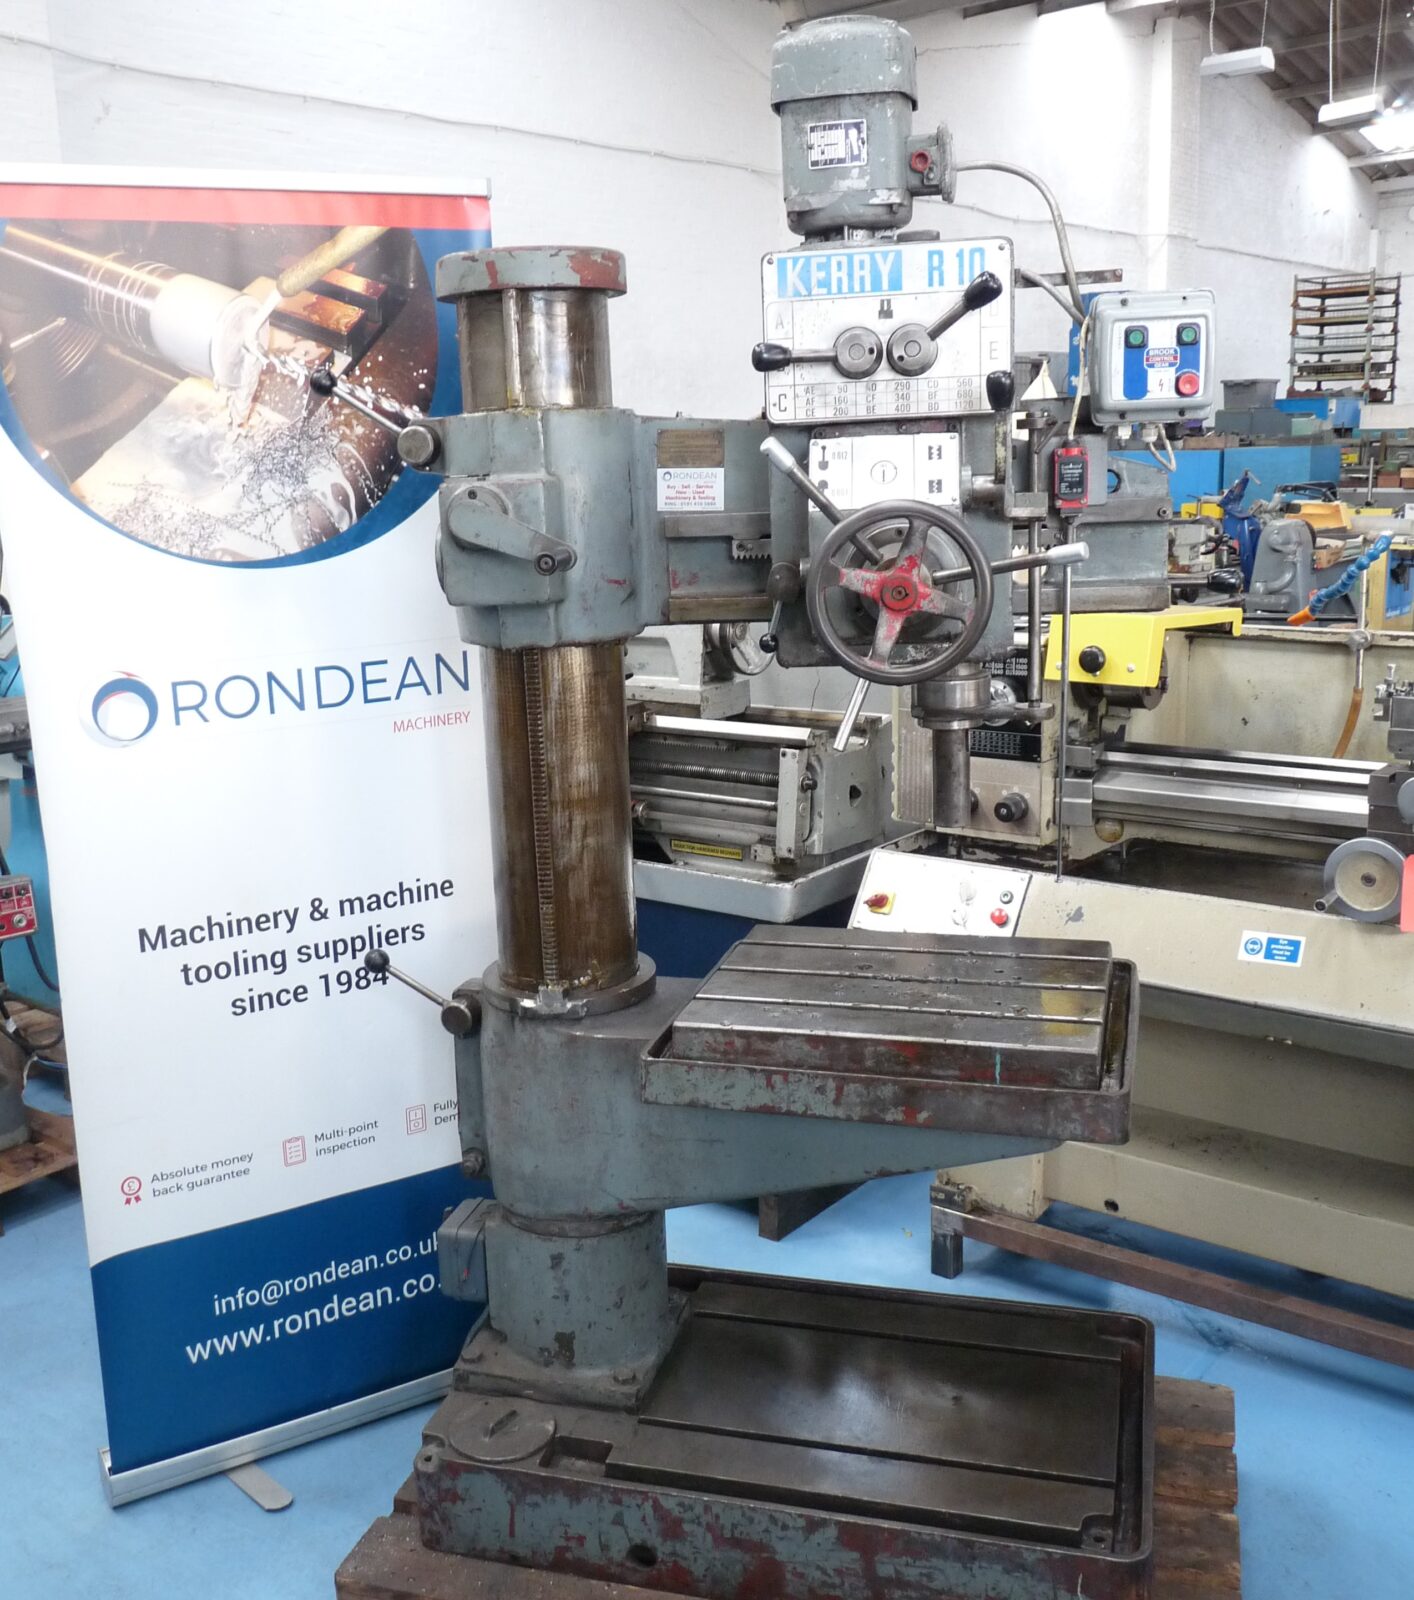 Kerry R10 Radial Arm Drill